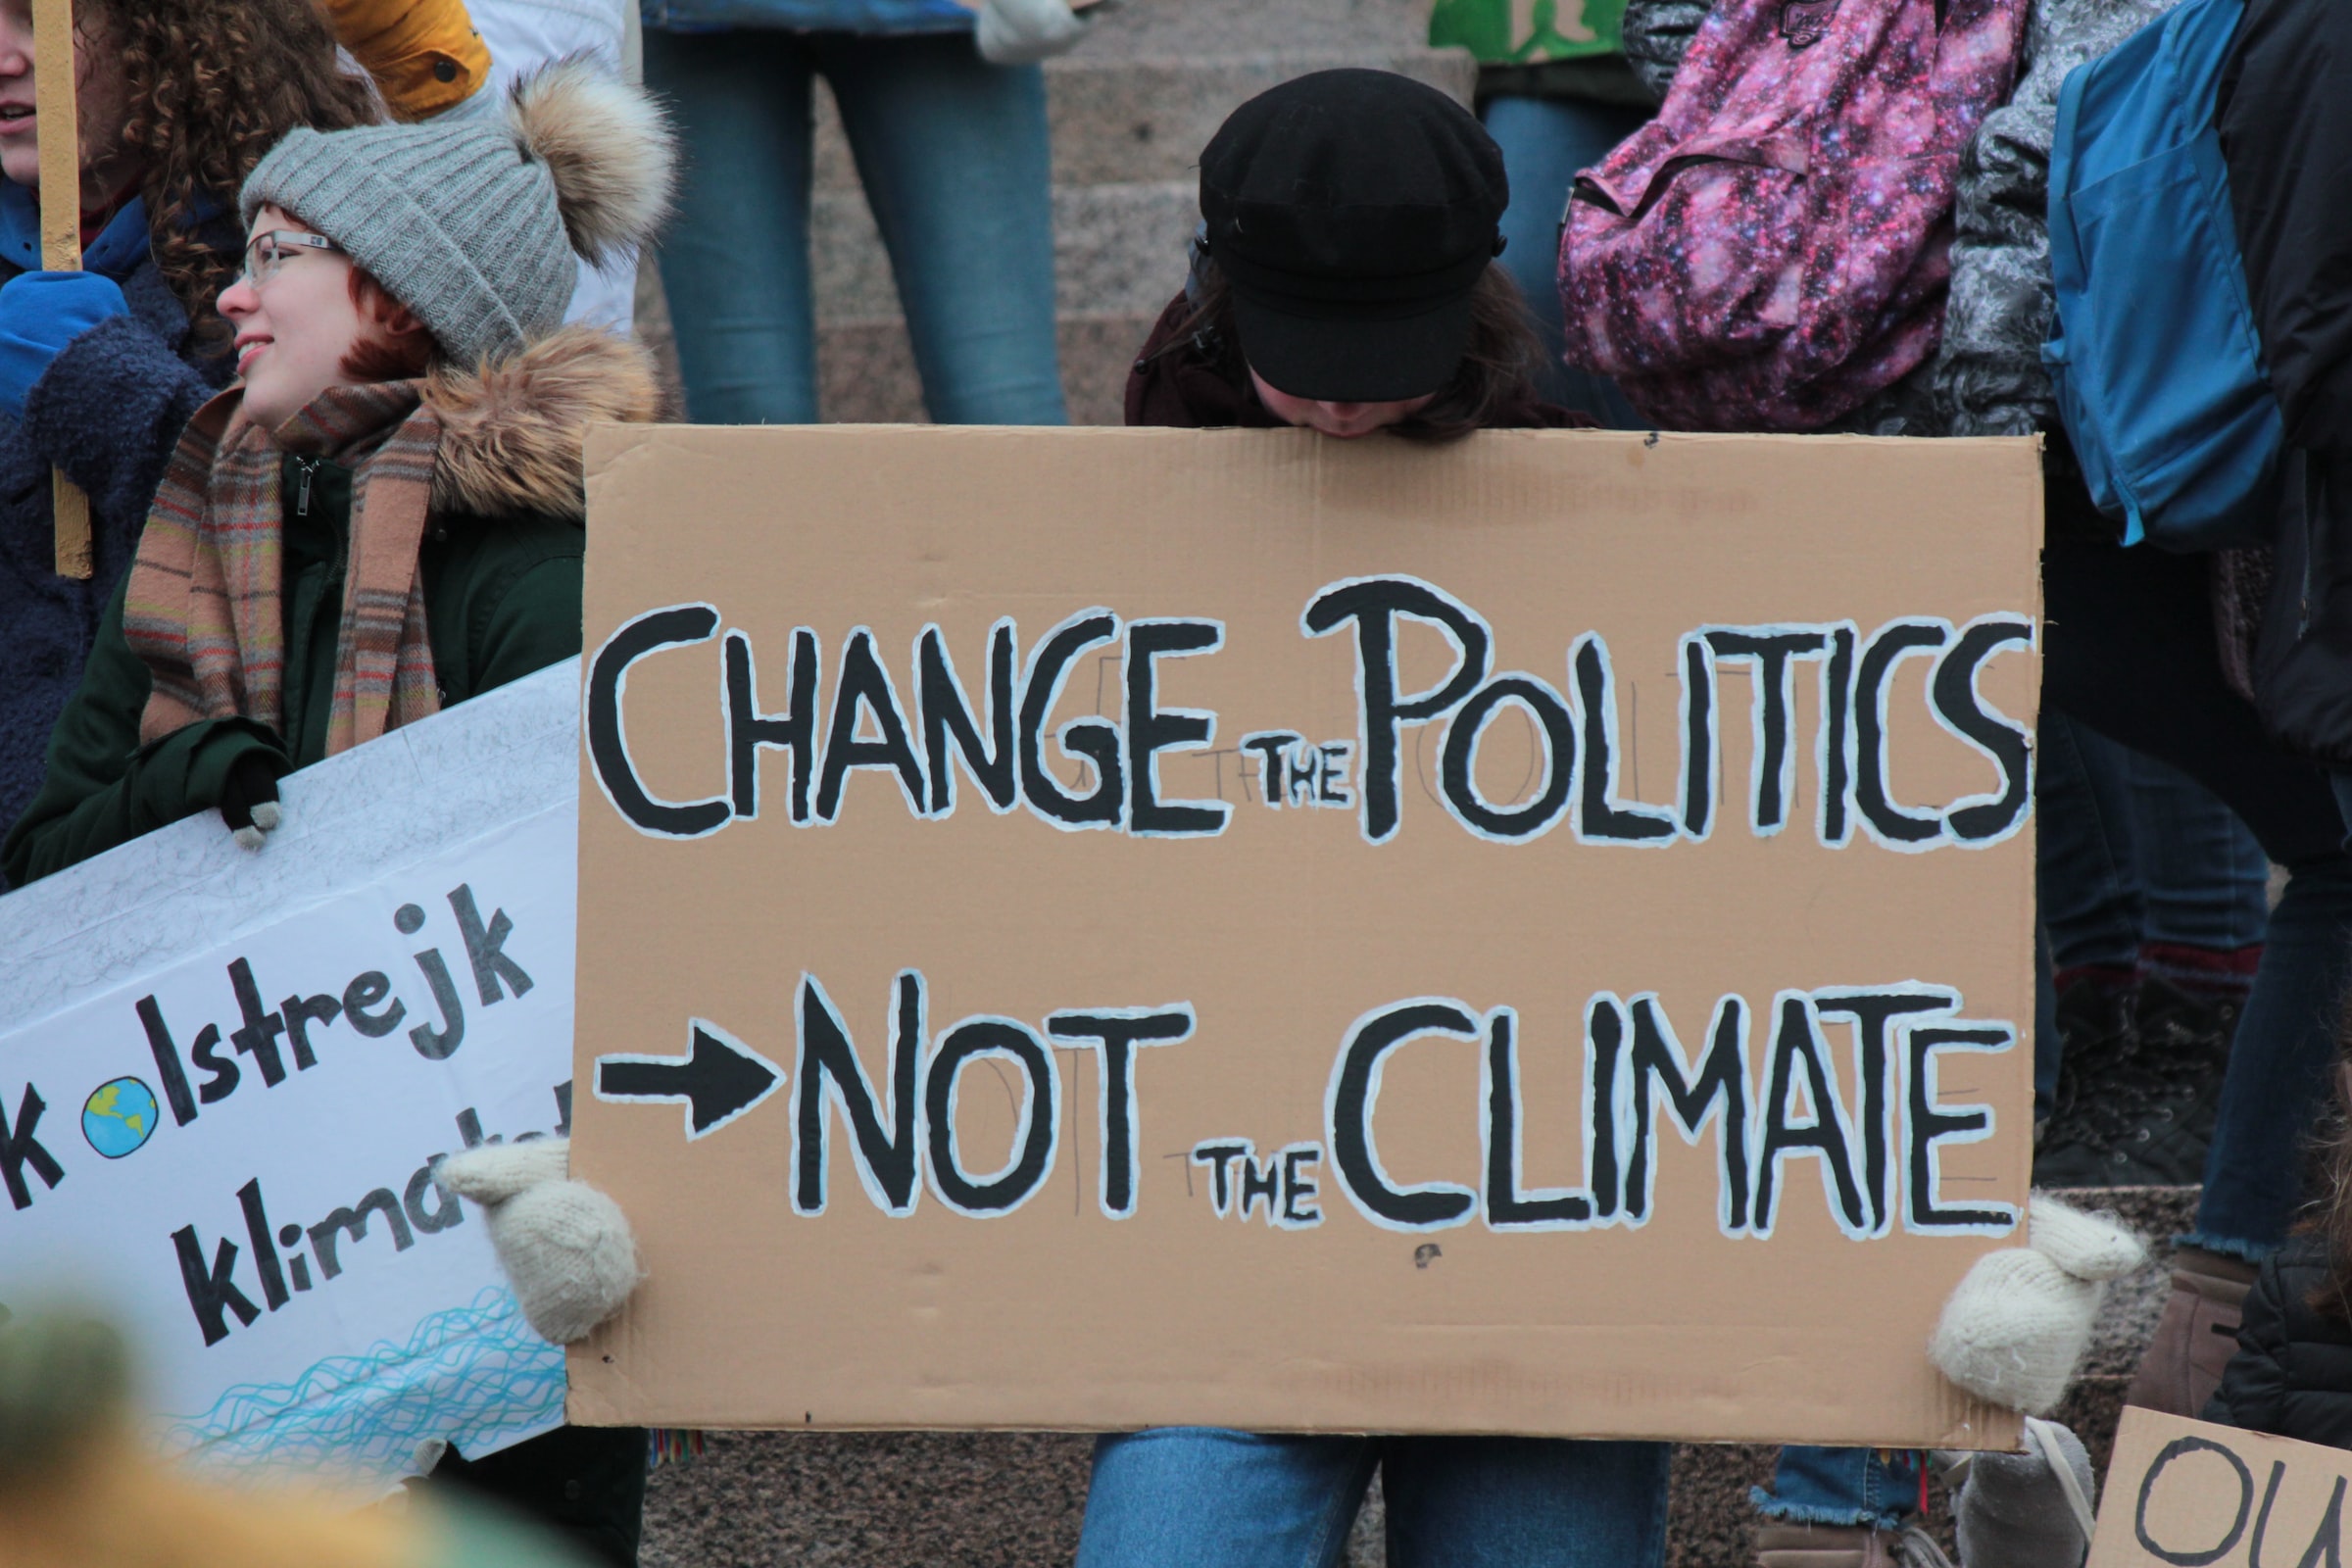 A cardboard sign reads "Change the Politics, Not the Climate"